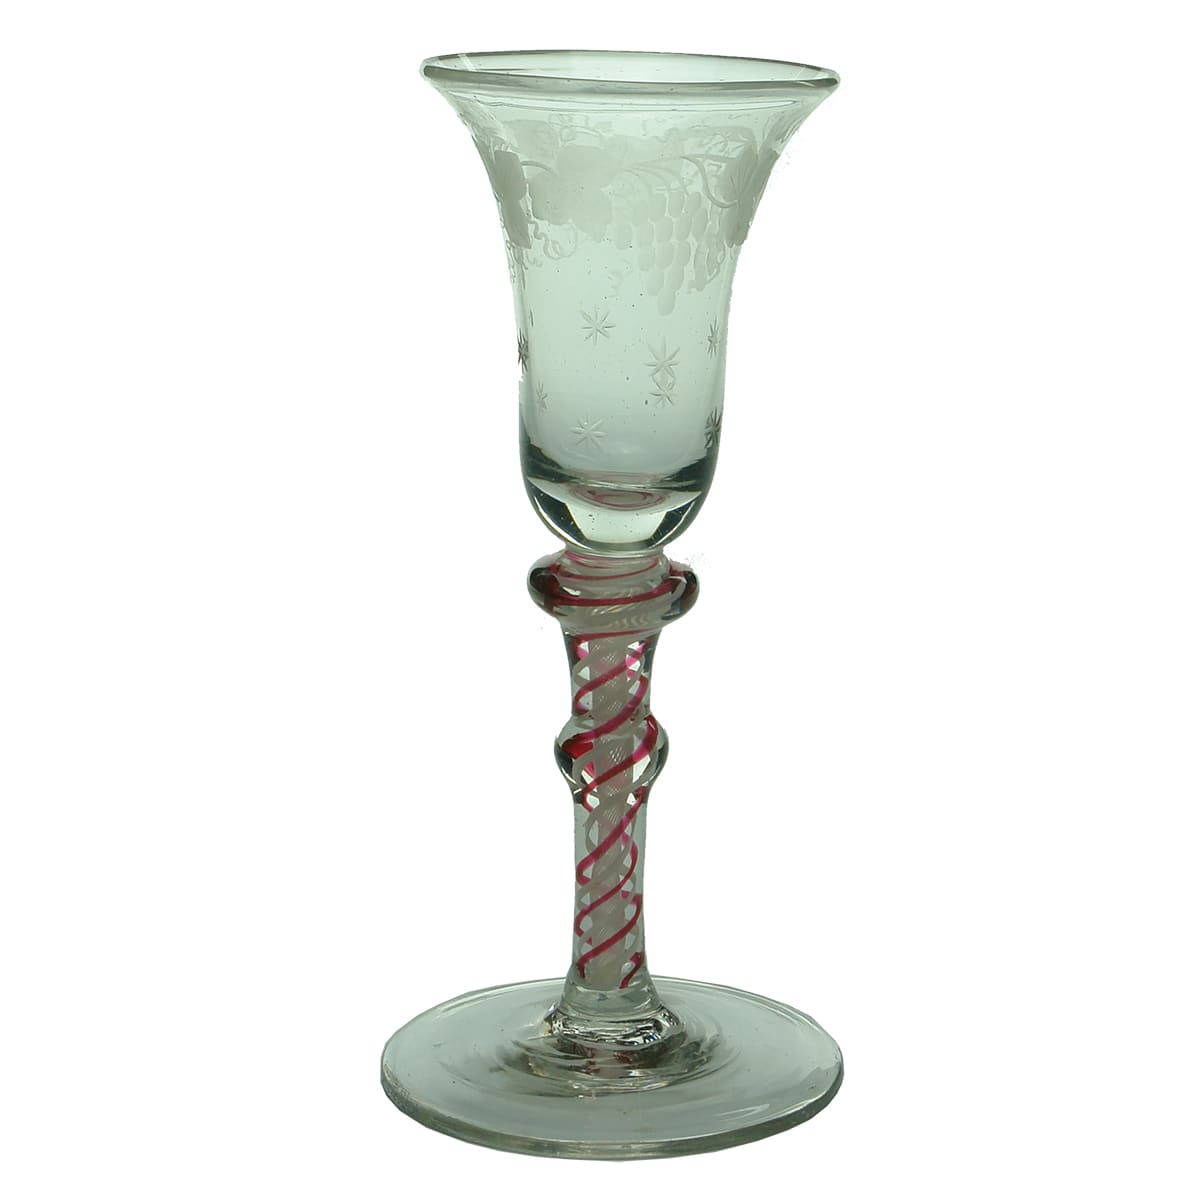 Glass. Georgian twisted red and white stem with double knops. Engraved grapes and vine.